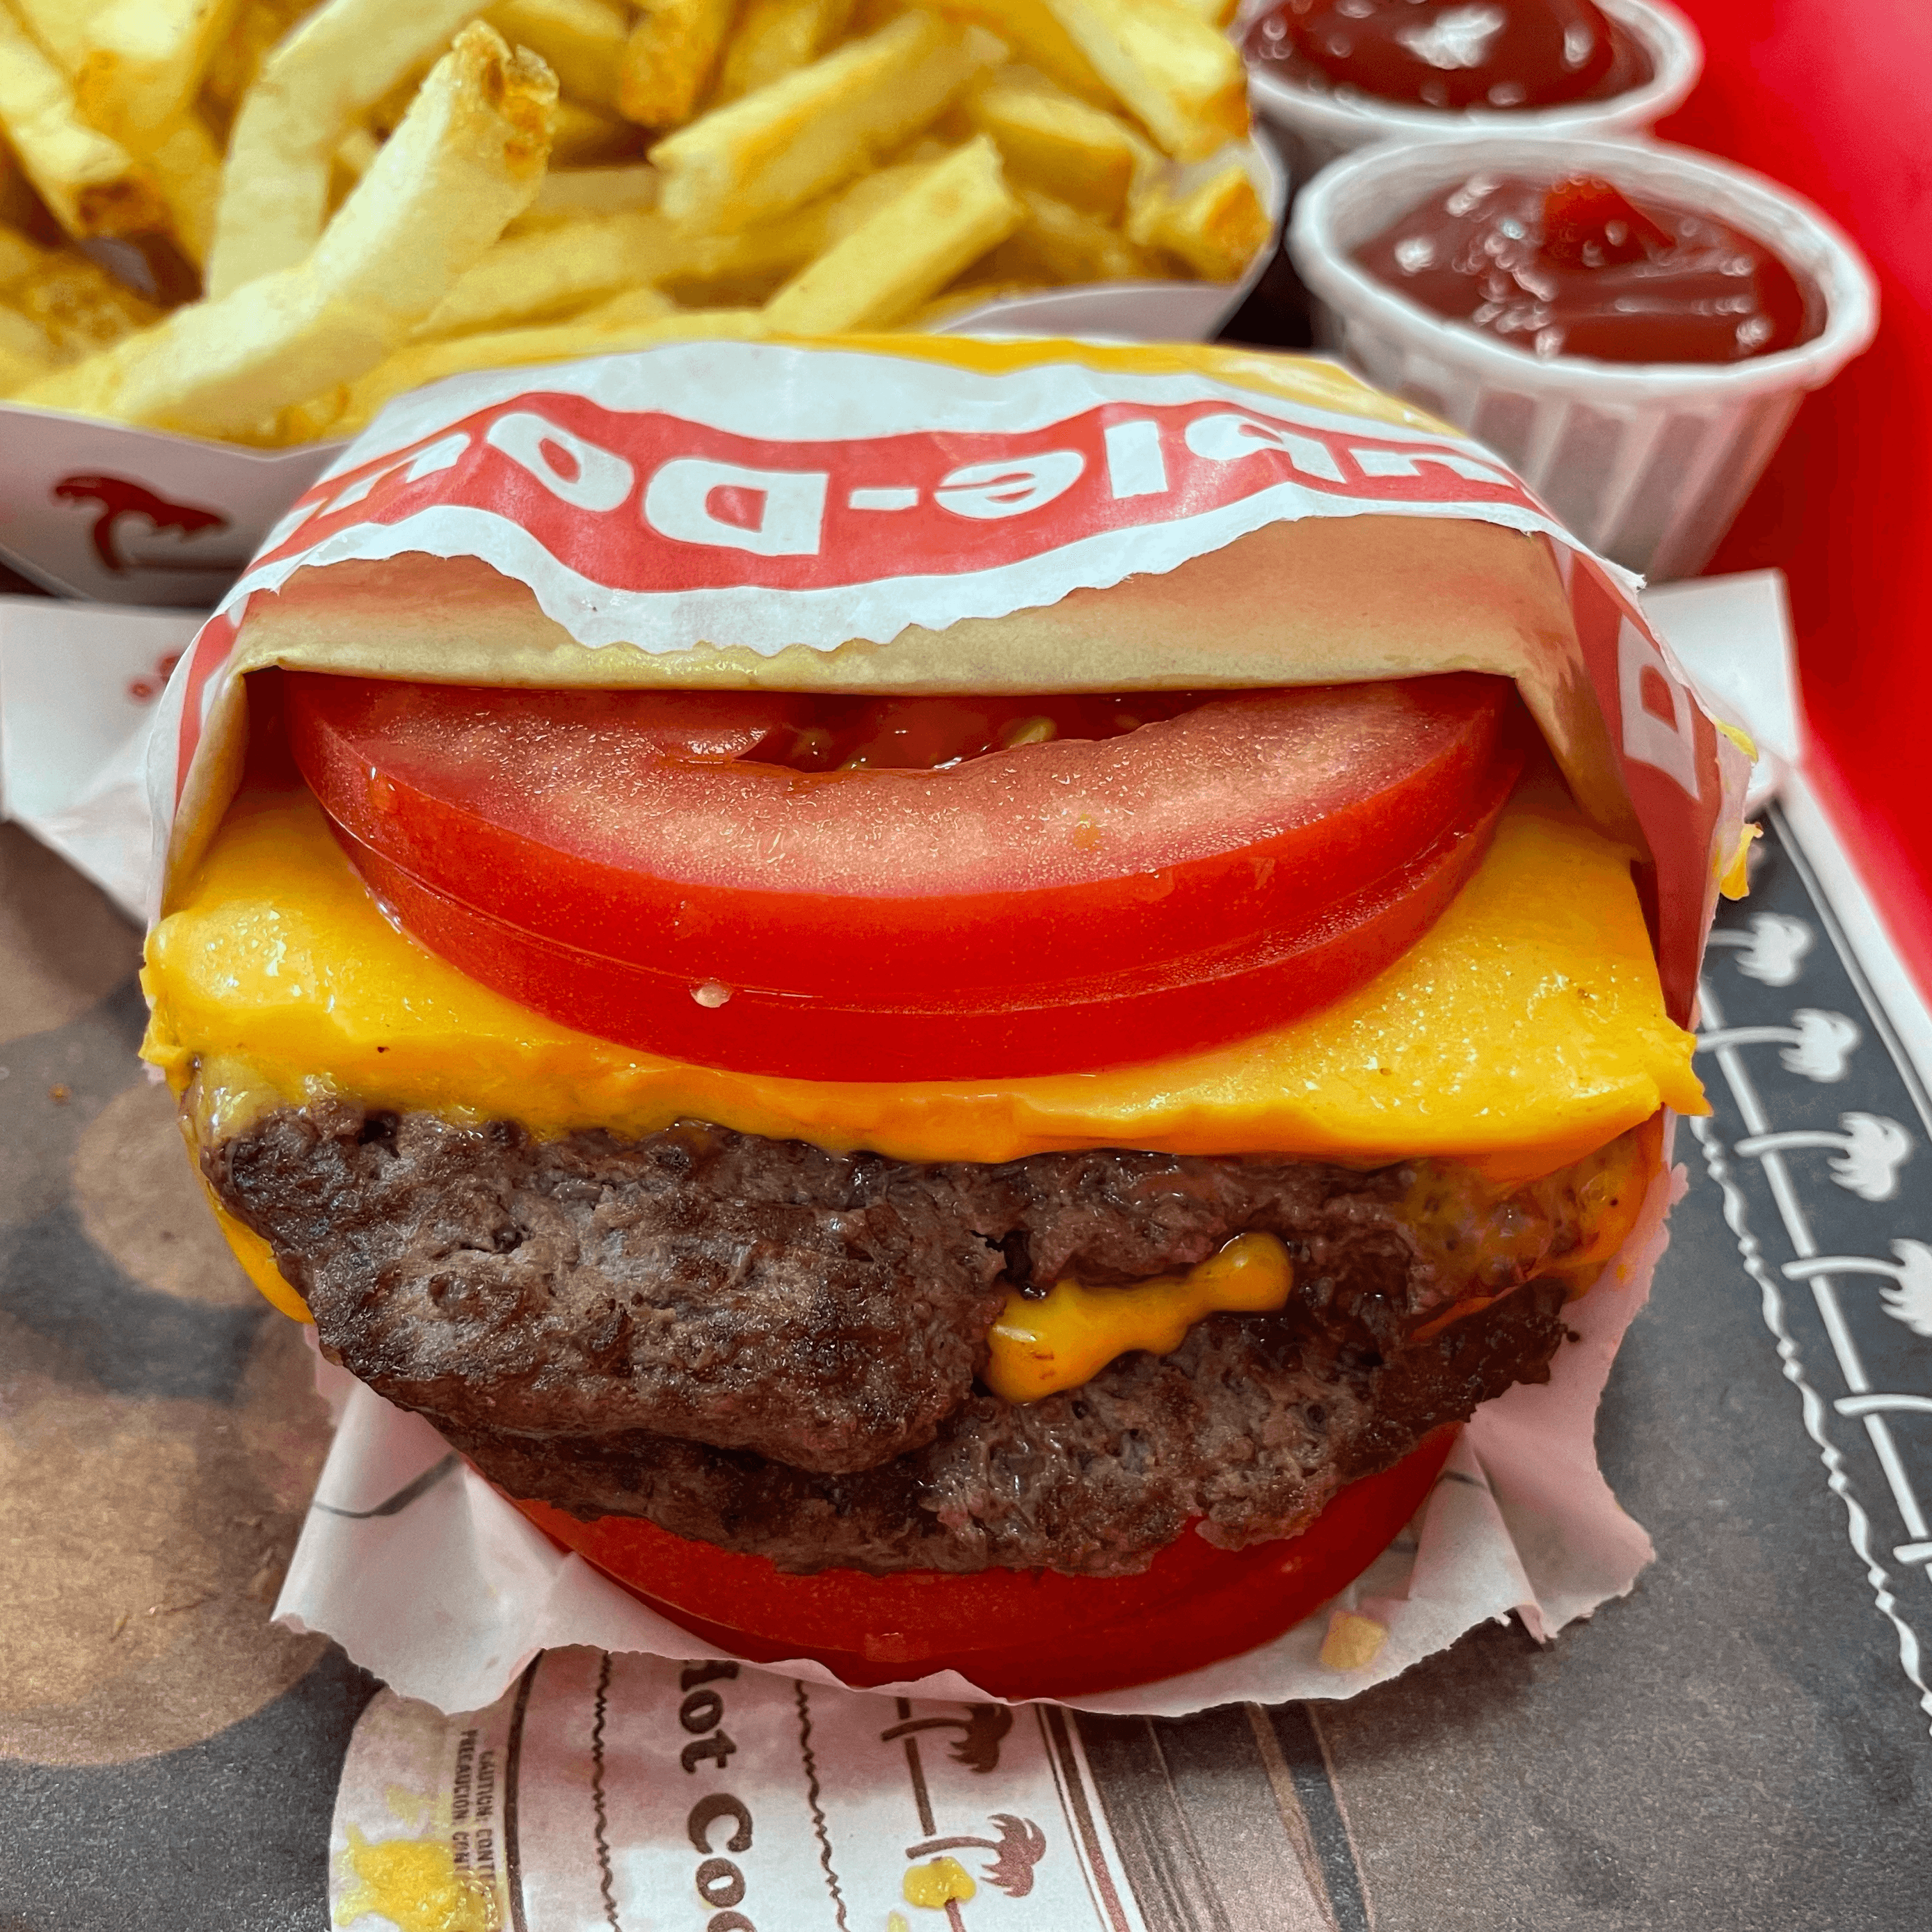 In-N-Out's Tomato-Wrapped Flying Dutchman Burger